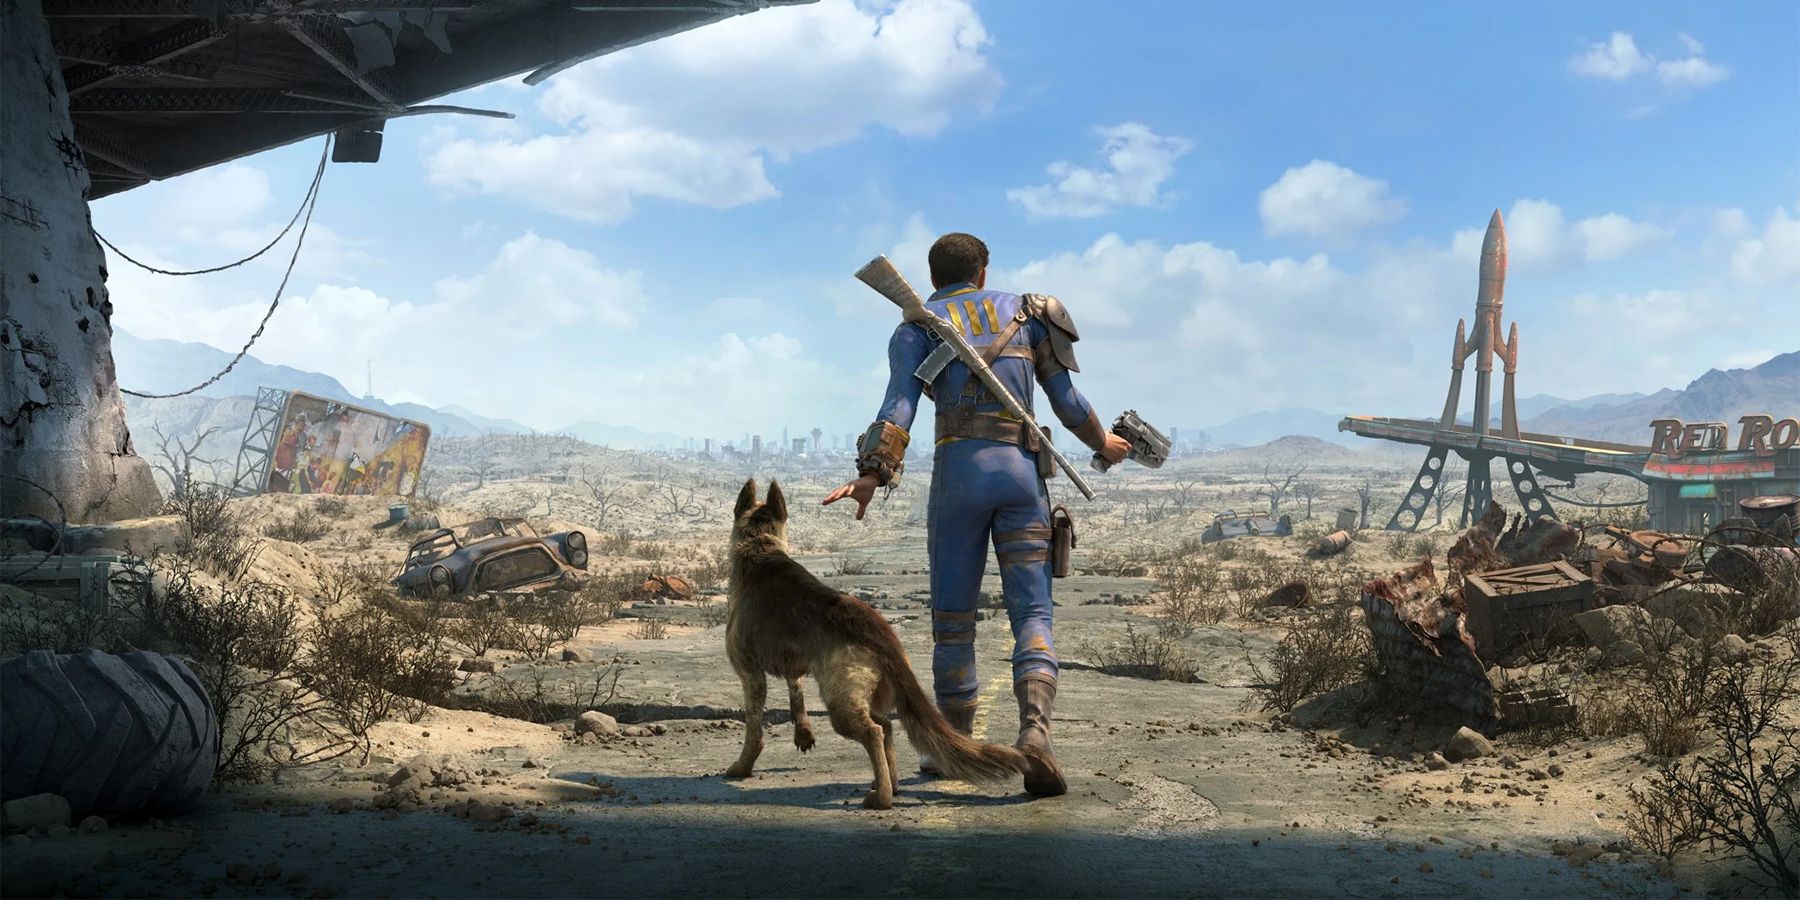 Fallout 4 Player Finally Beats the Game After 8 Years